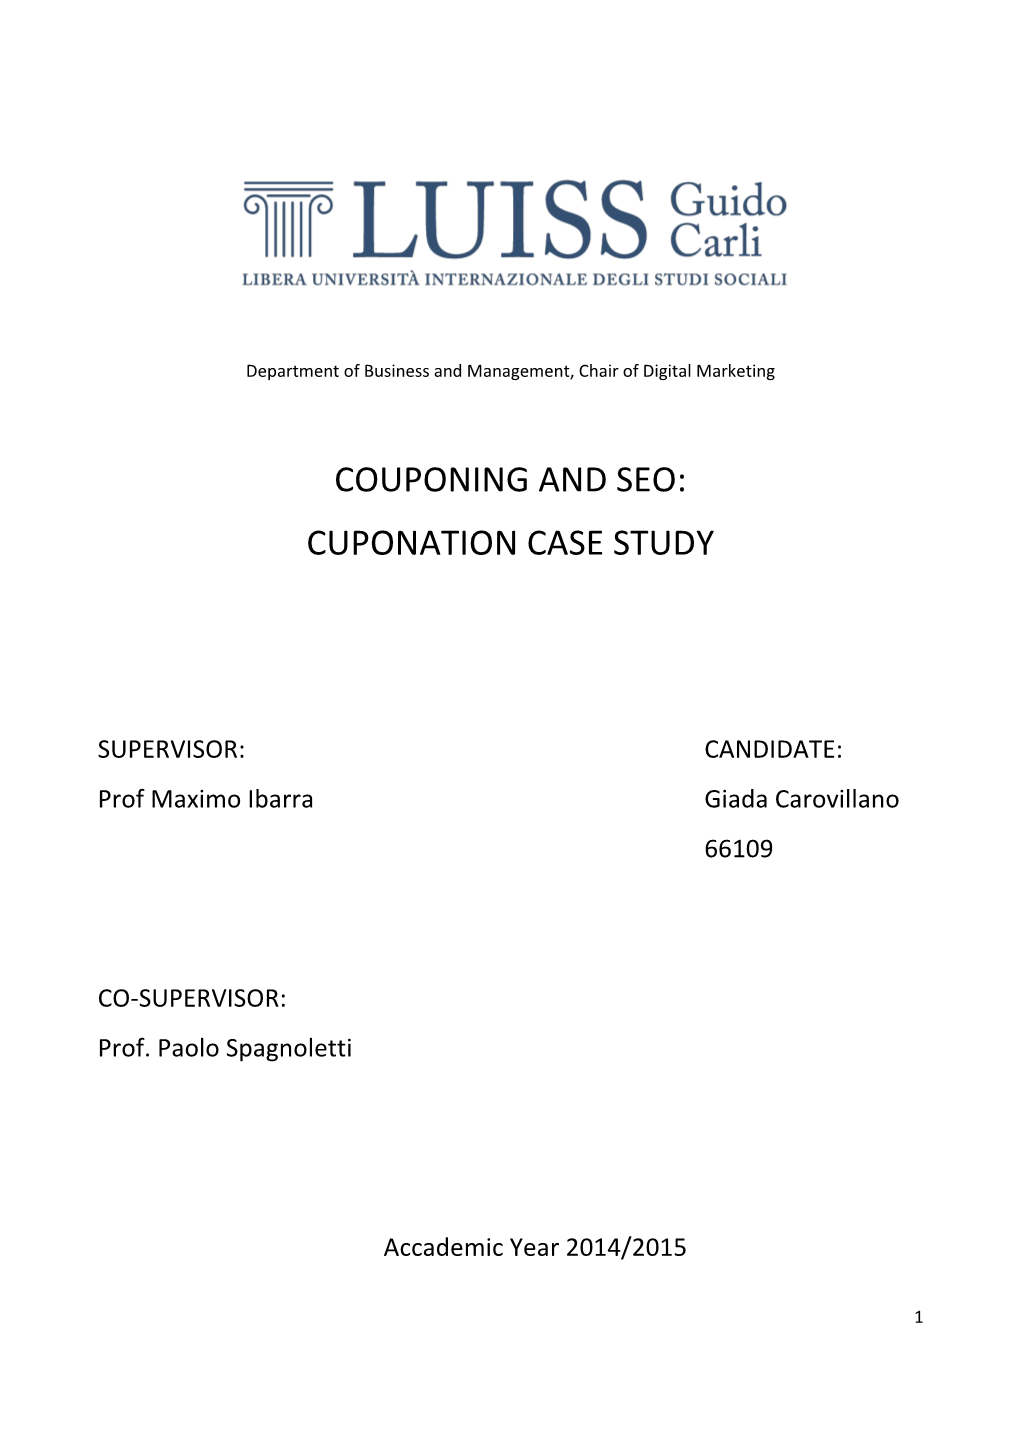 Couponing and Seo: Cuponation Case Study